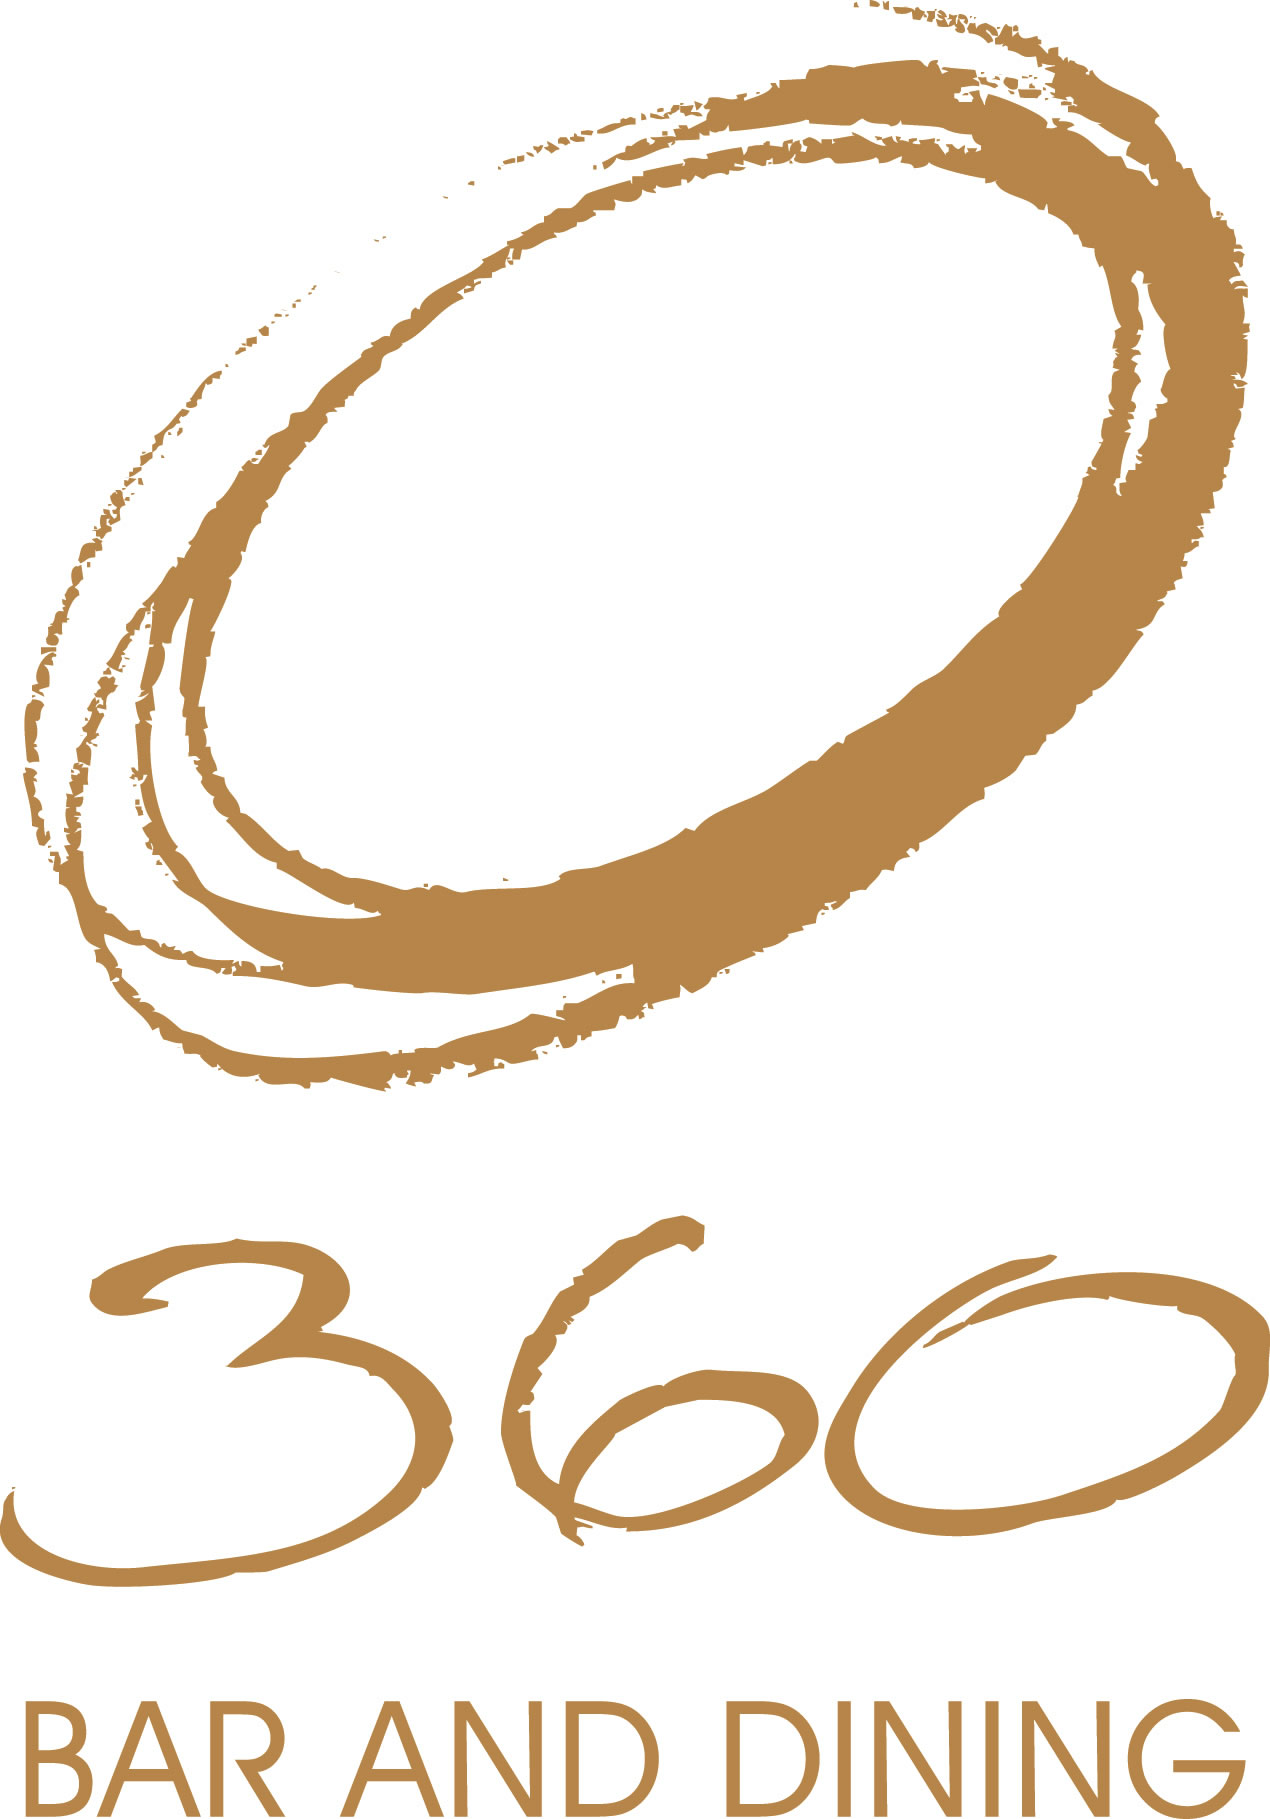 360 Bar And Dining - Restaurant Guide 0